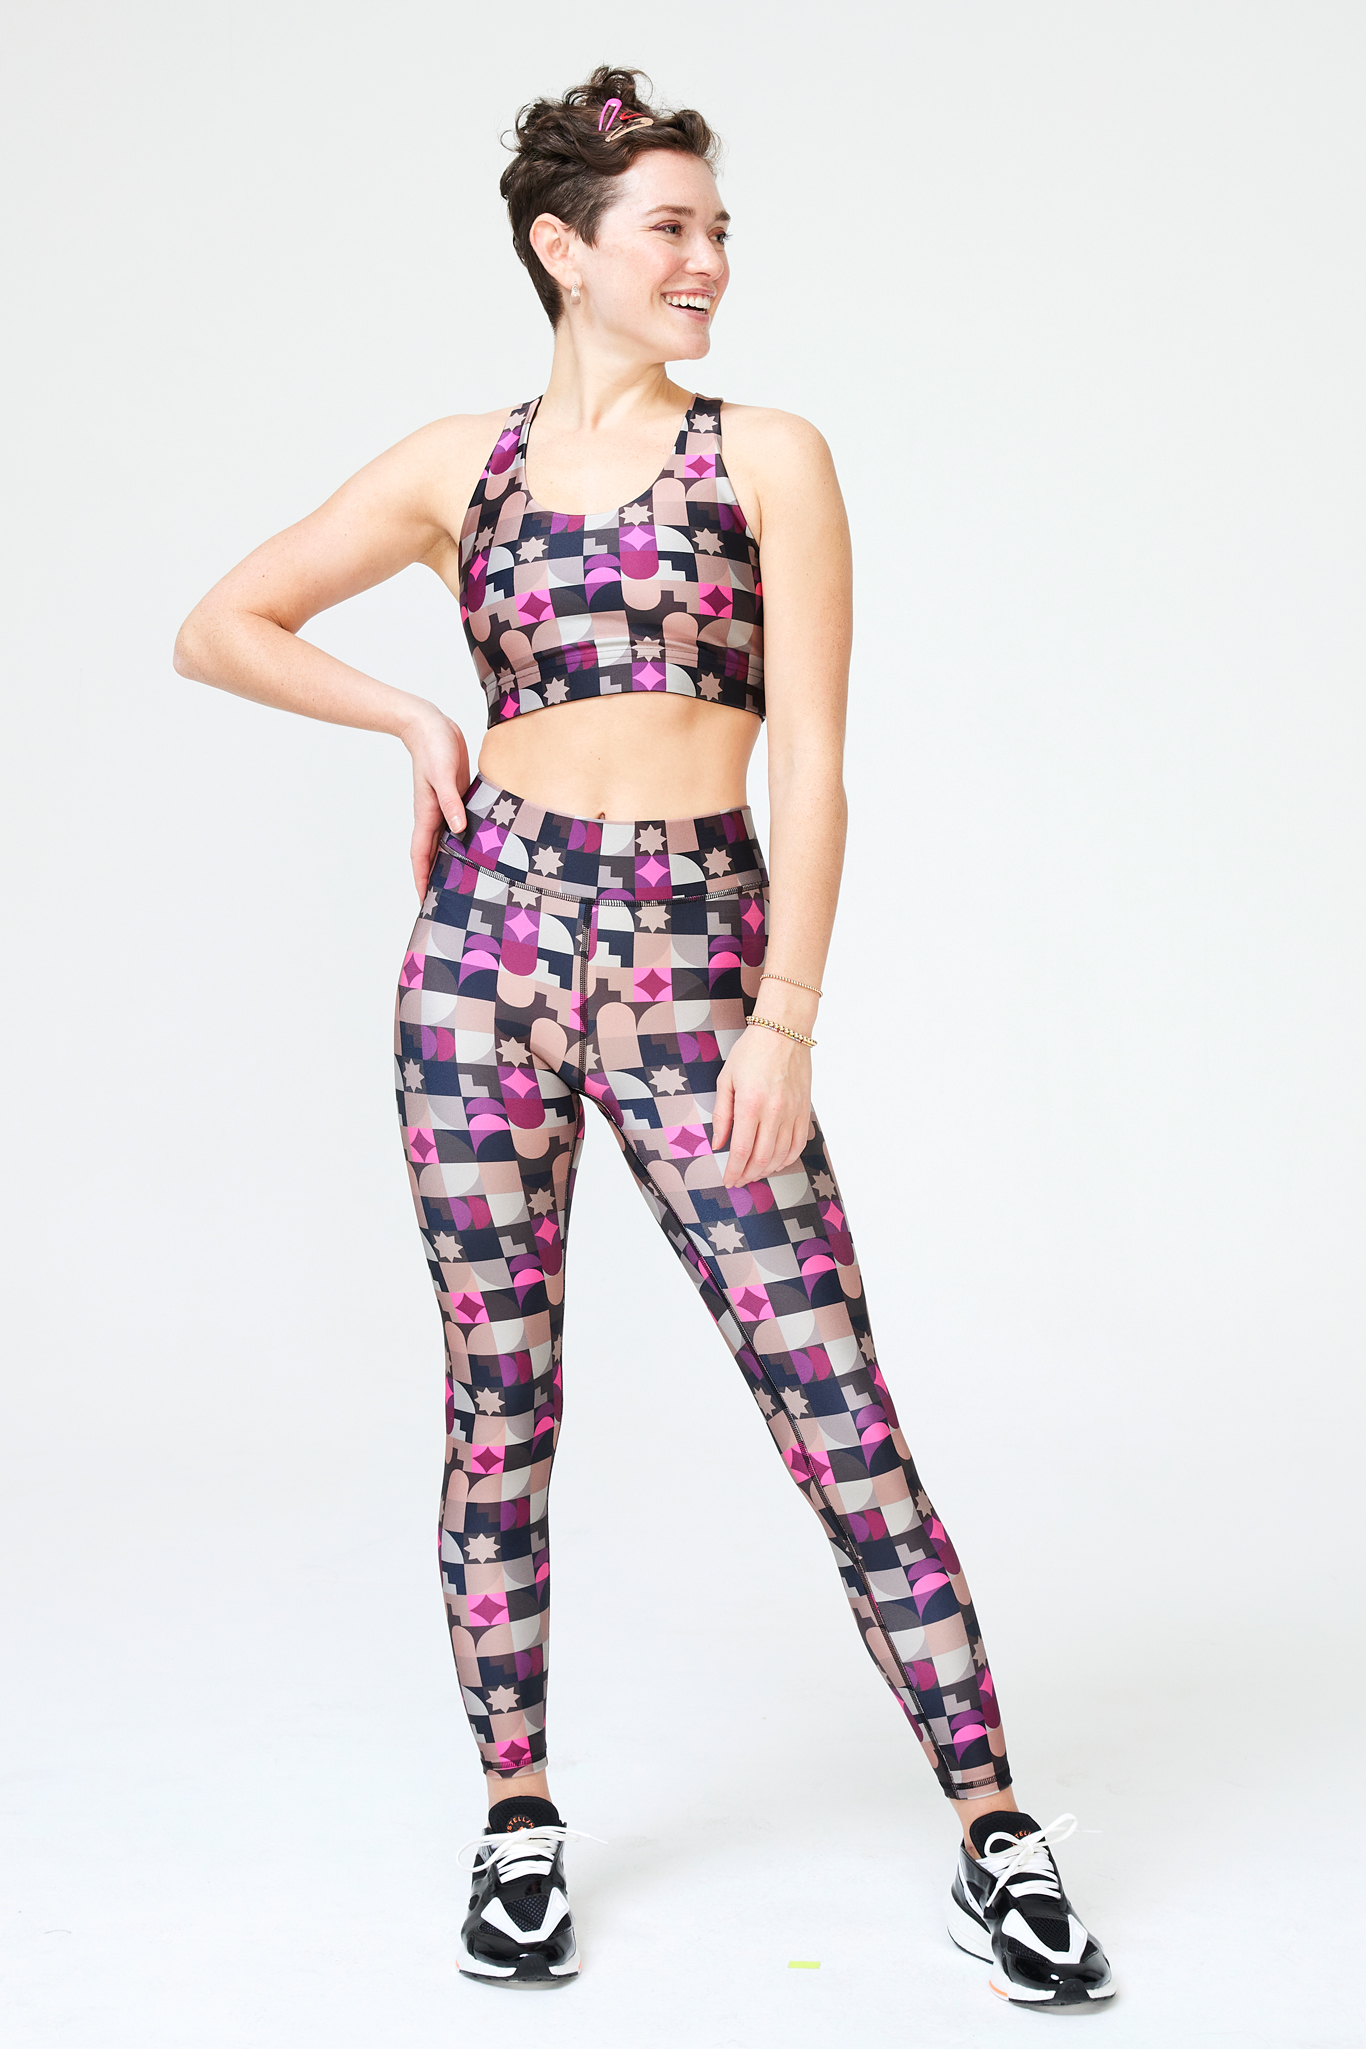 Hi-Shine Leggings in Jade Chevron  Outfits with leggings, Clothing  essentials, Swimming outfit